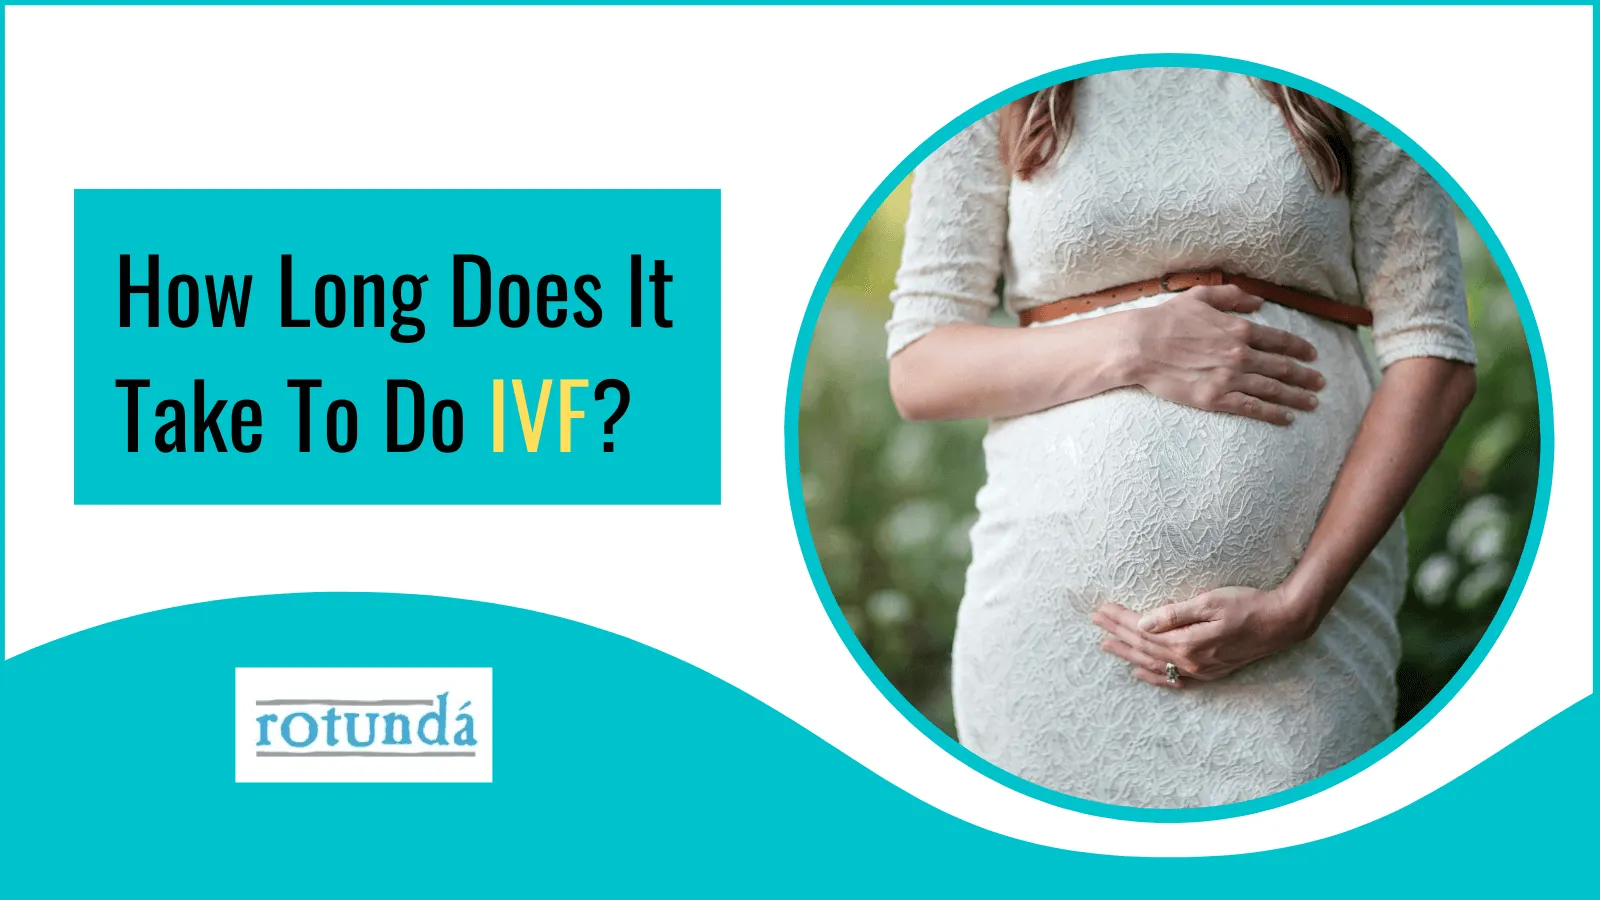 How Long Does It Take To Do IVF?